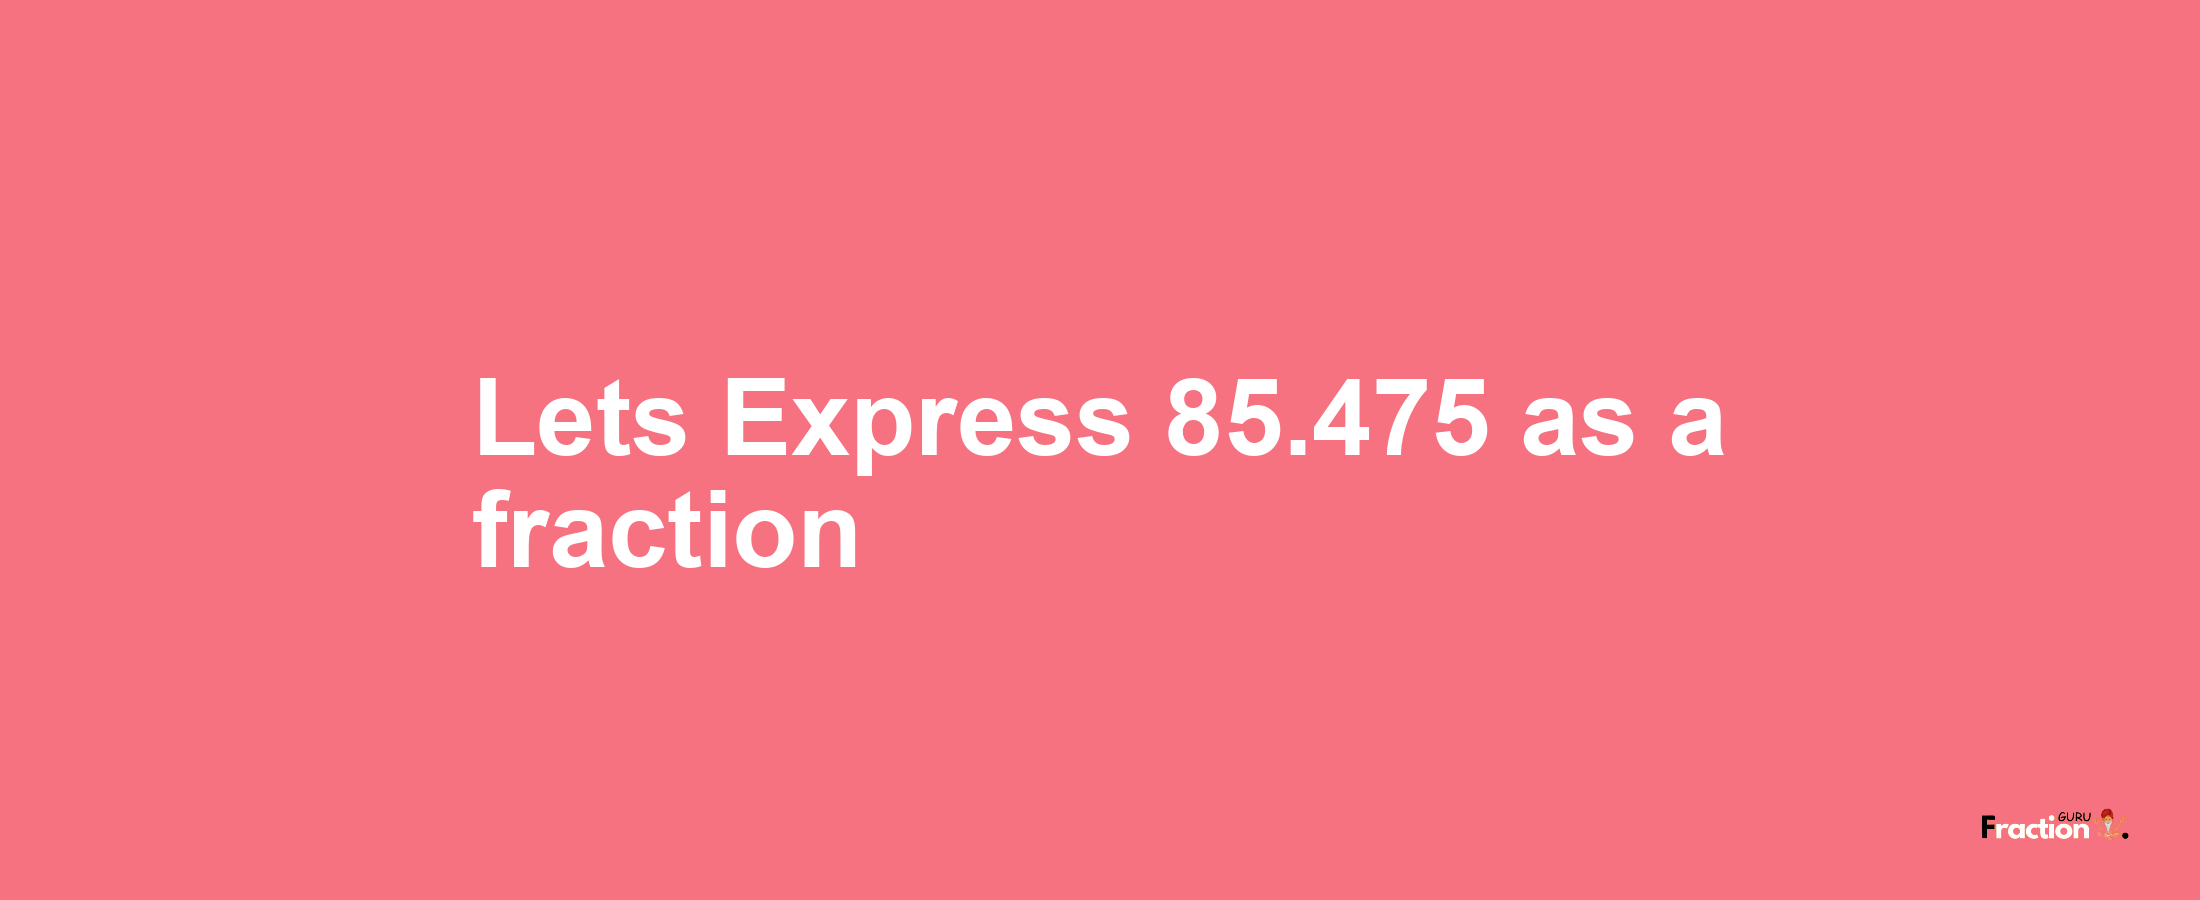 Lets Express 85.475 as afraction